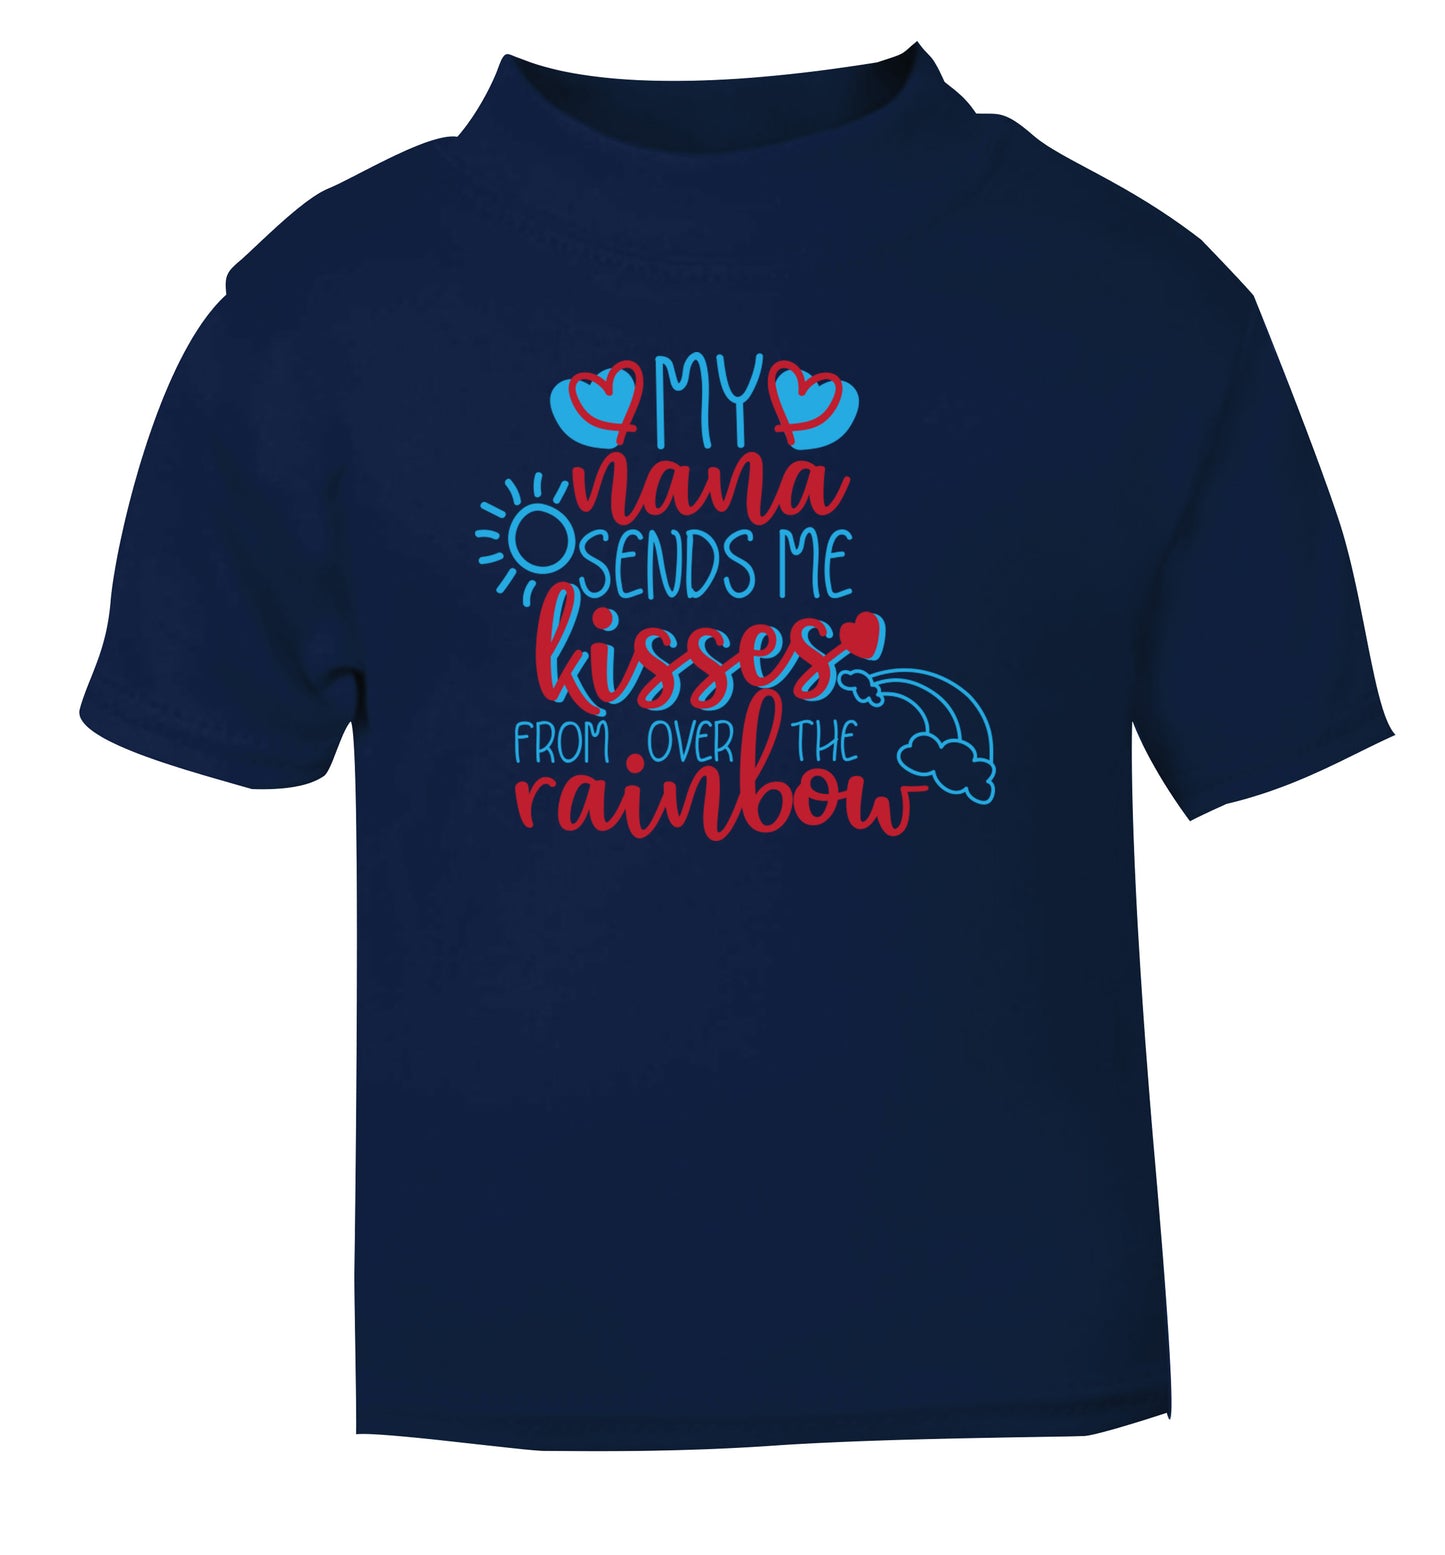 My nana sends me kisses from over the rainbow navy Baby Toddler Tshirt 2 Years